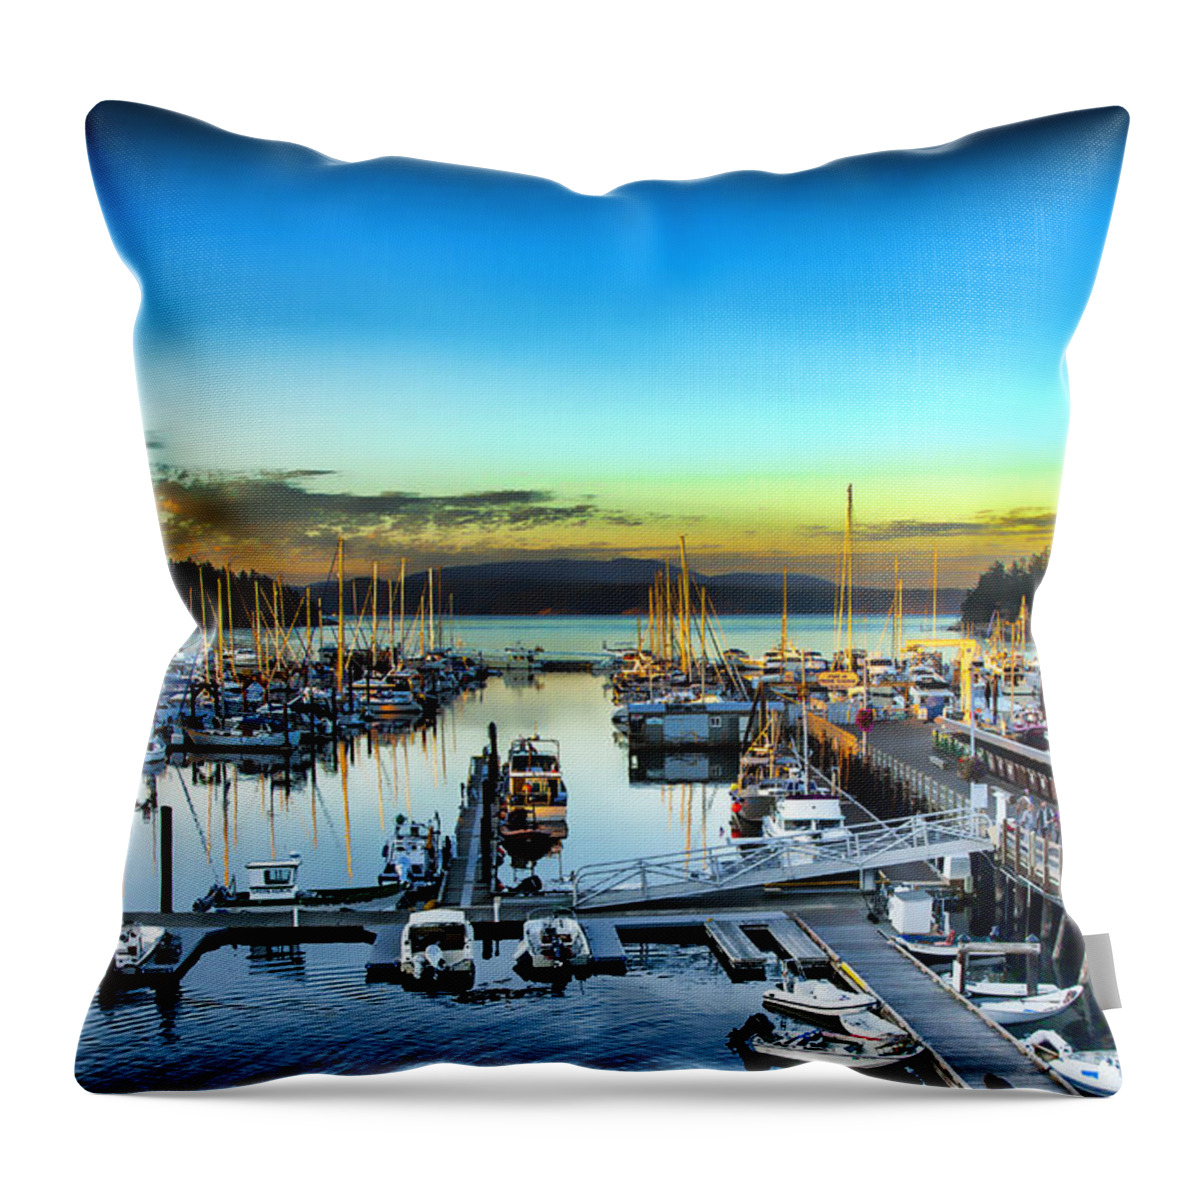 Marina Throw Pillow featuring the photograph Friday Harbor by Jerry Nettik